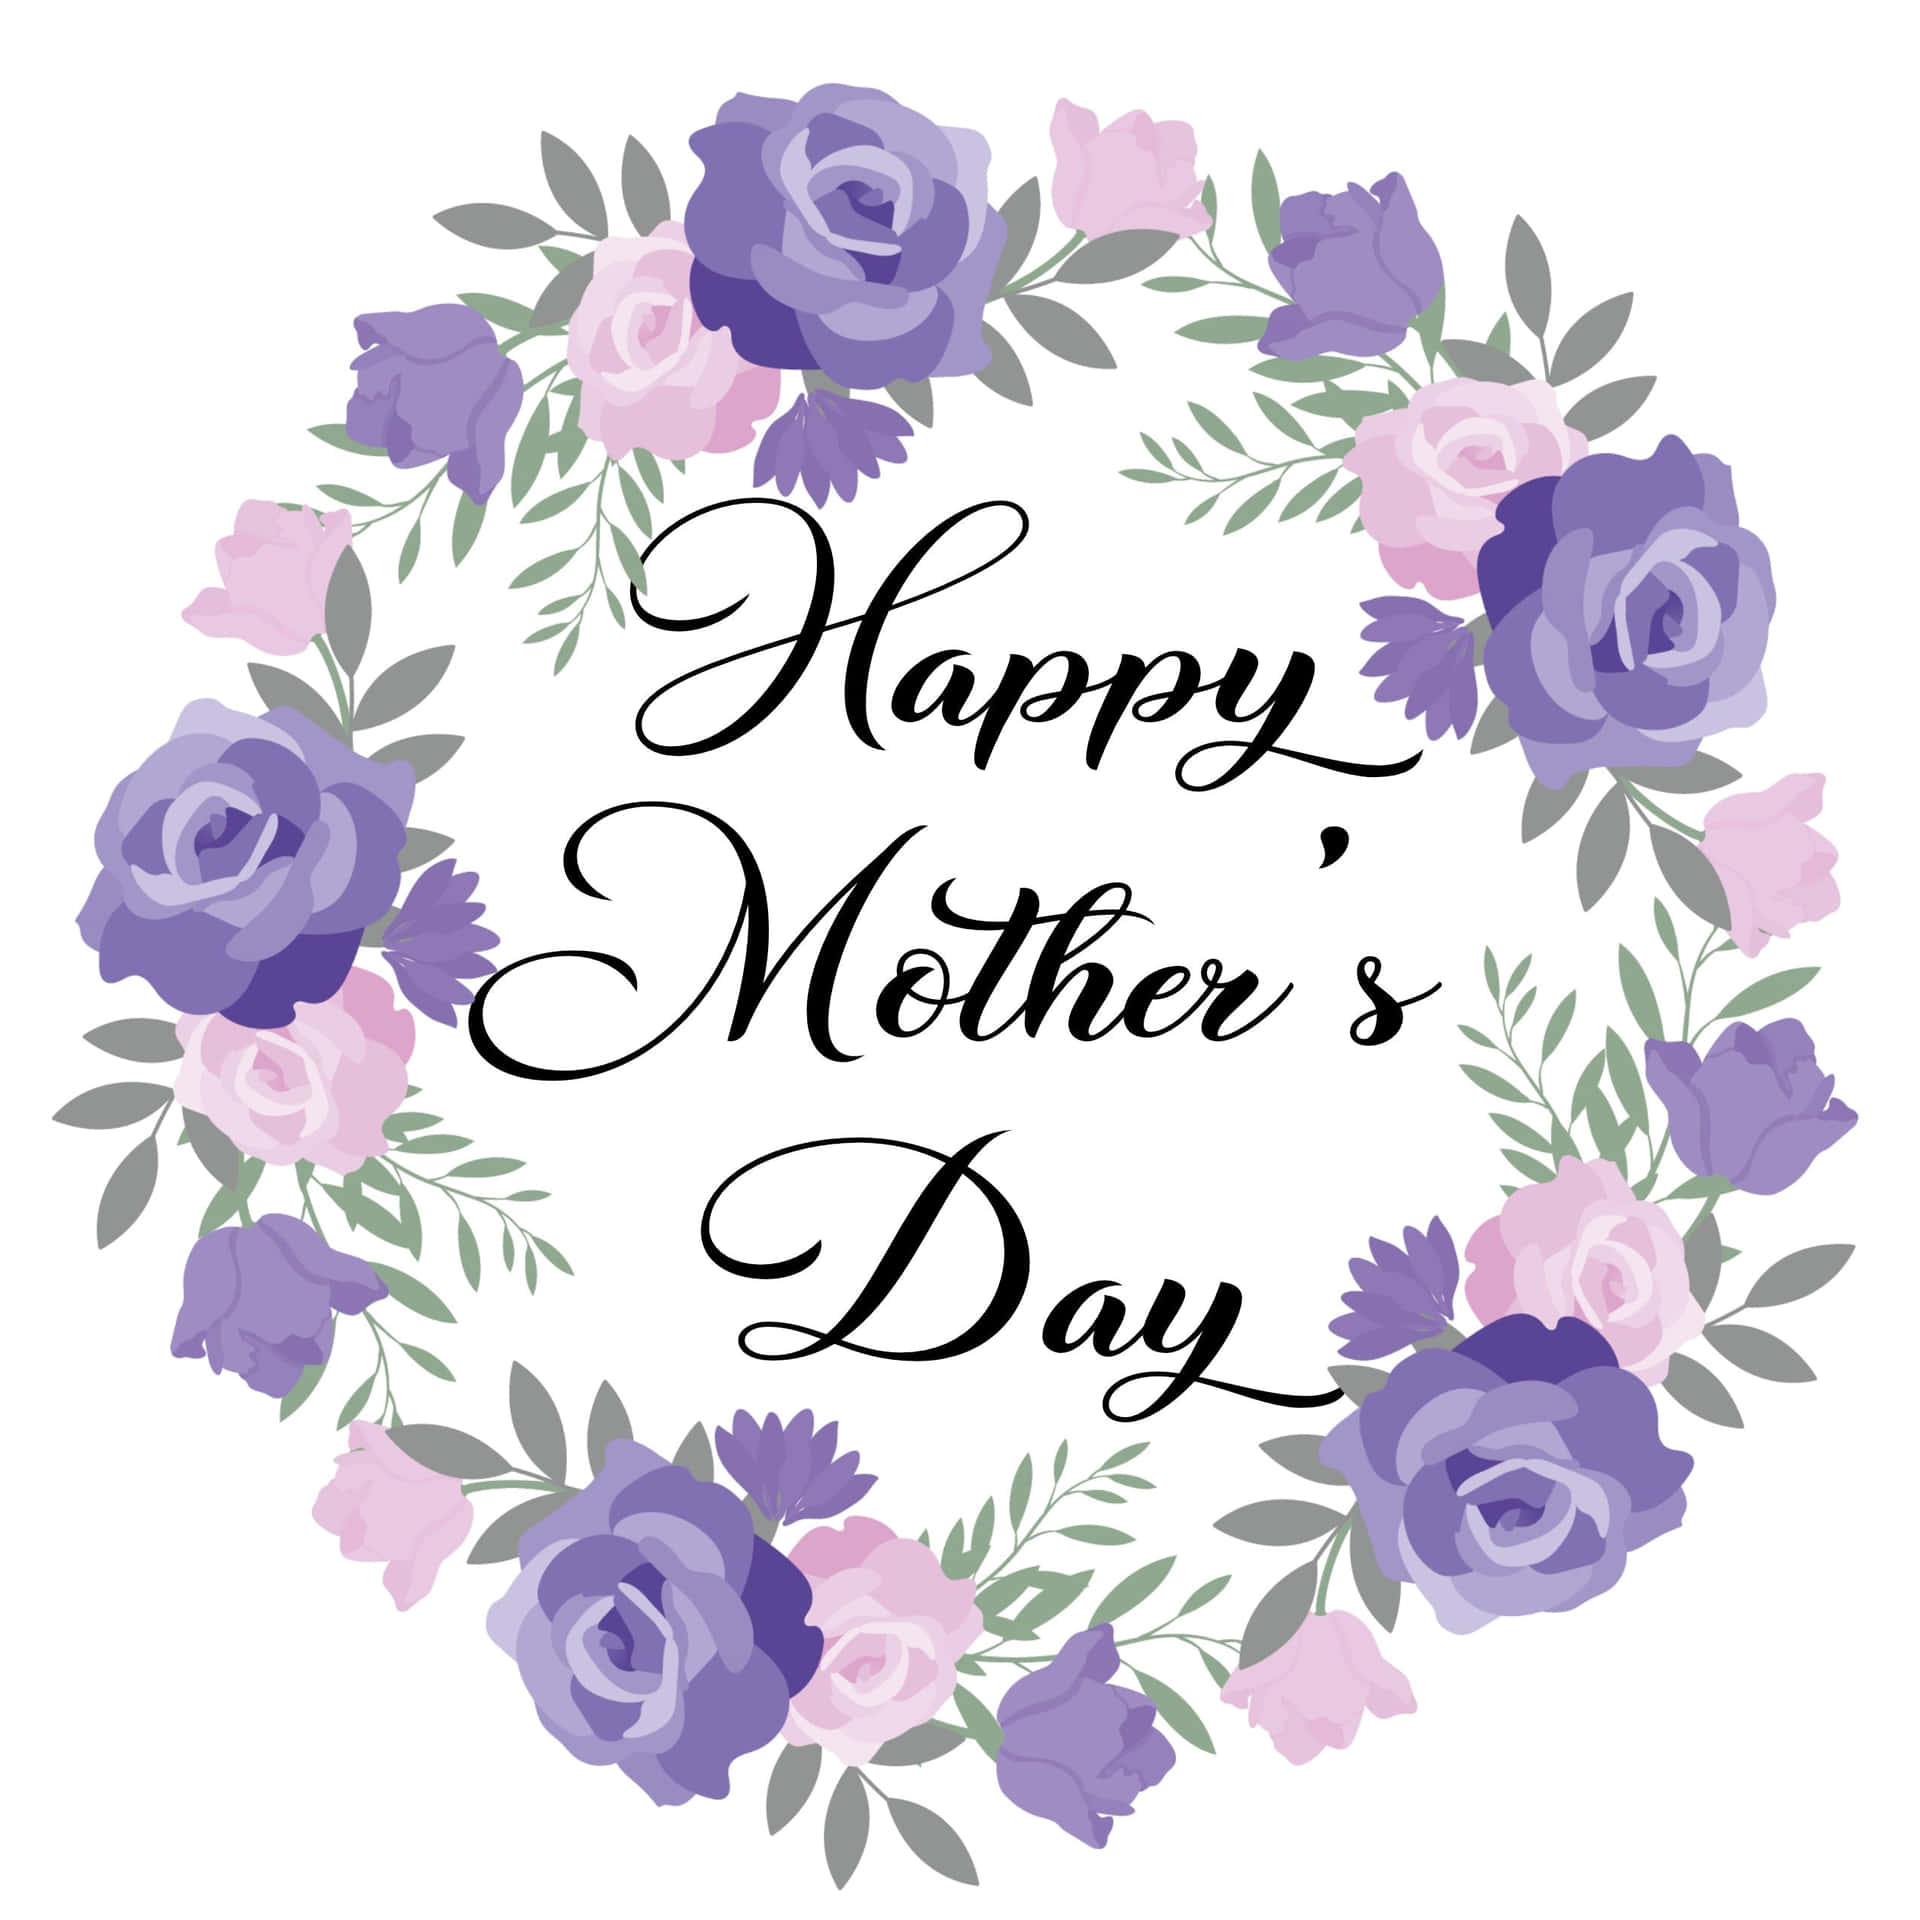 "Happy Mothers Day - Celebrate the special day with your beloved mom"